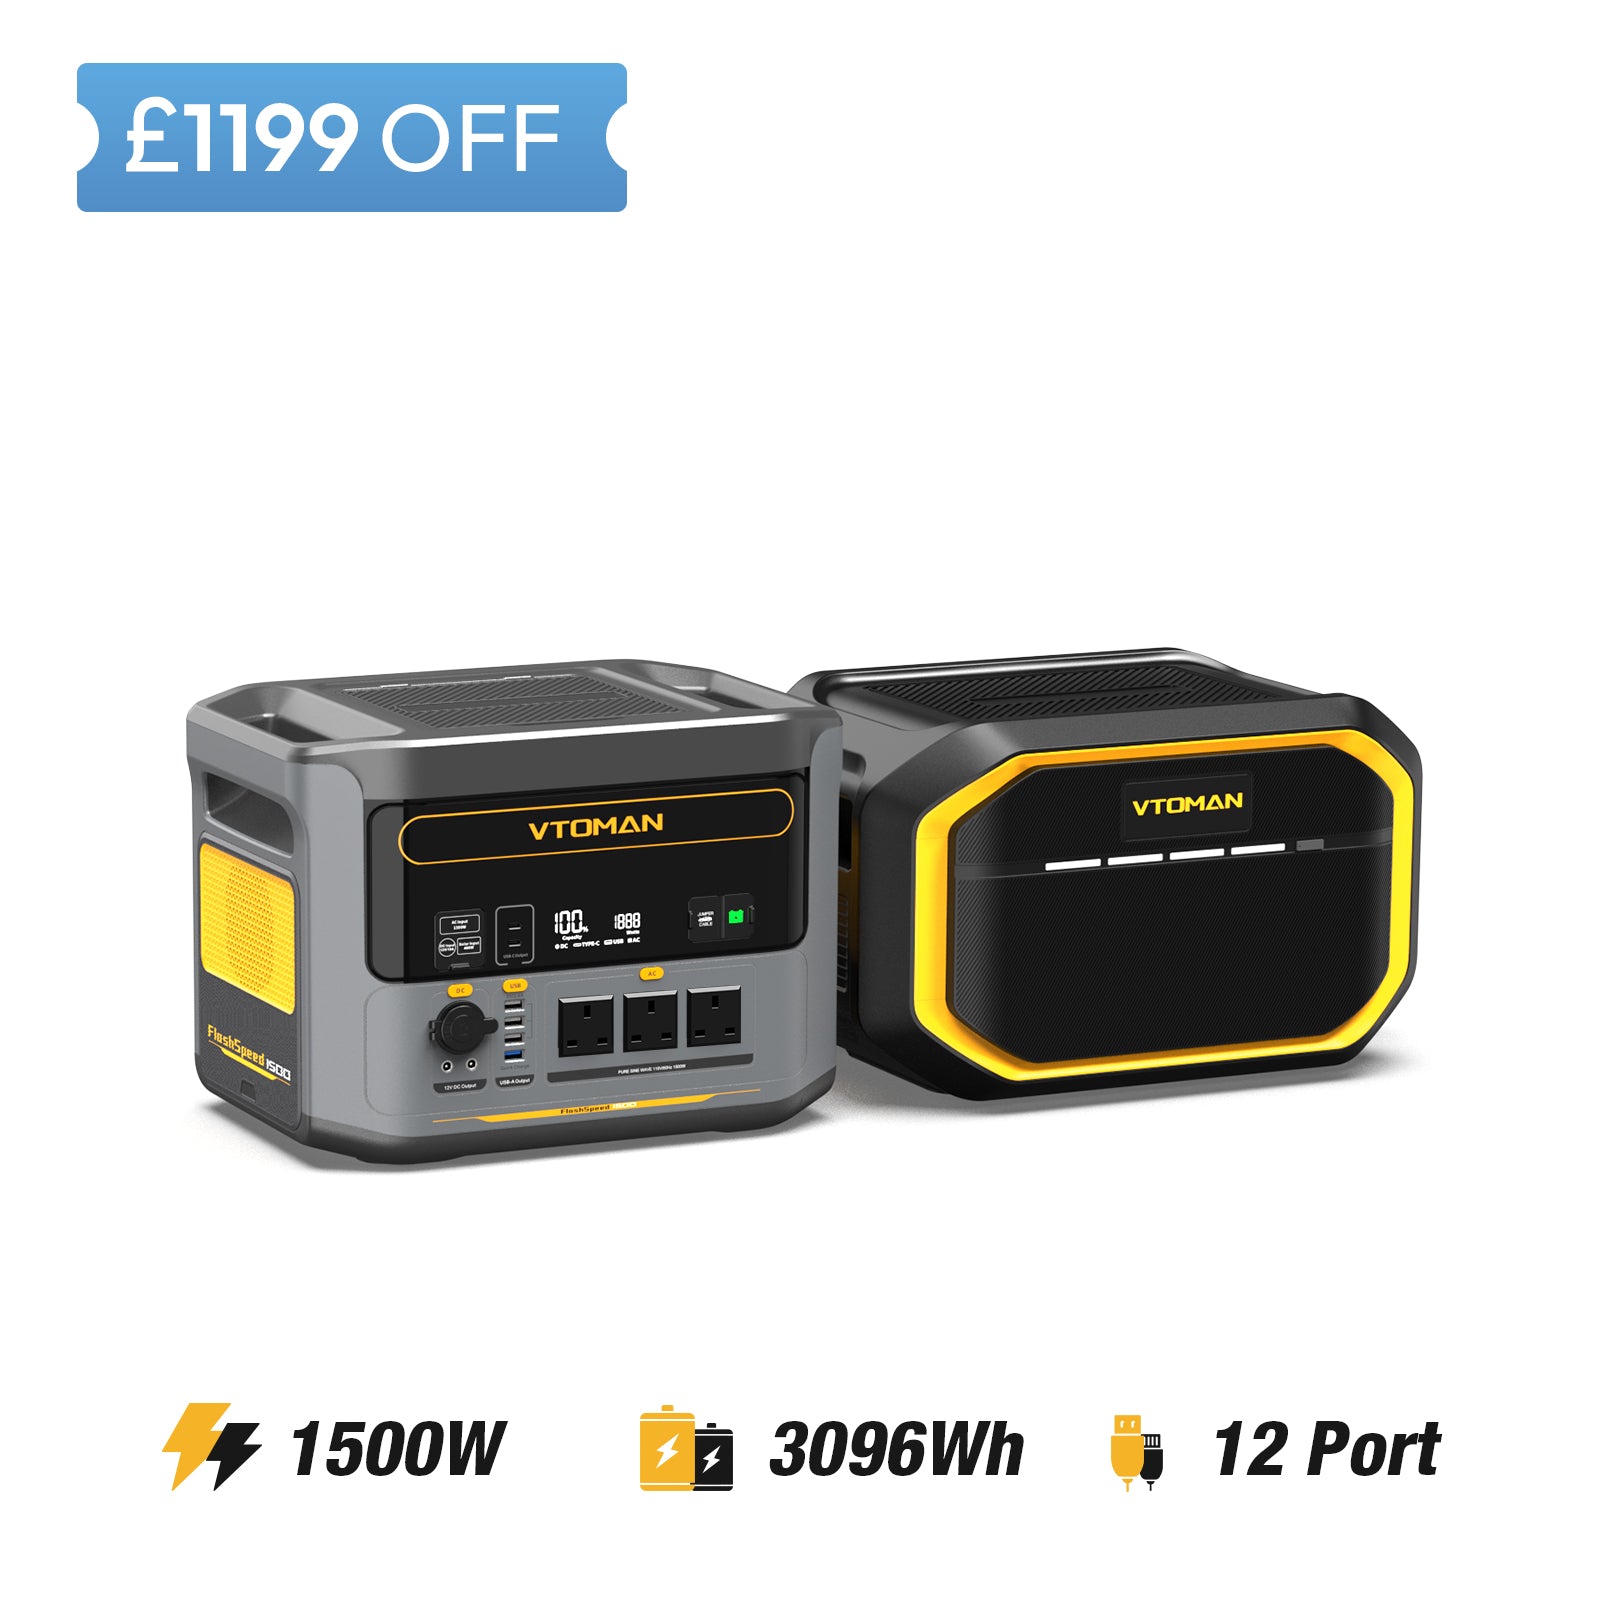 FlashSpeed 1500 and 1548Wh extra batterysave £1199 in summer sale